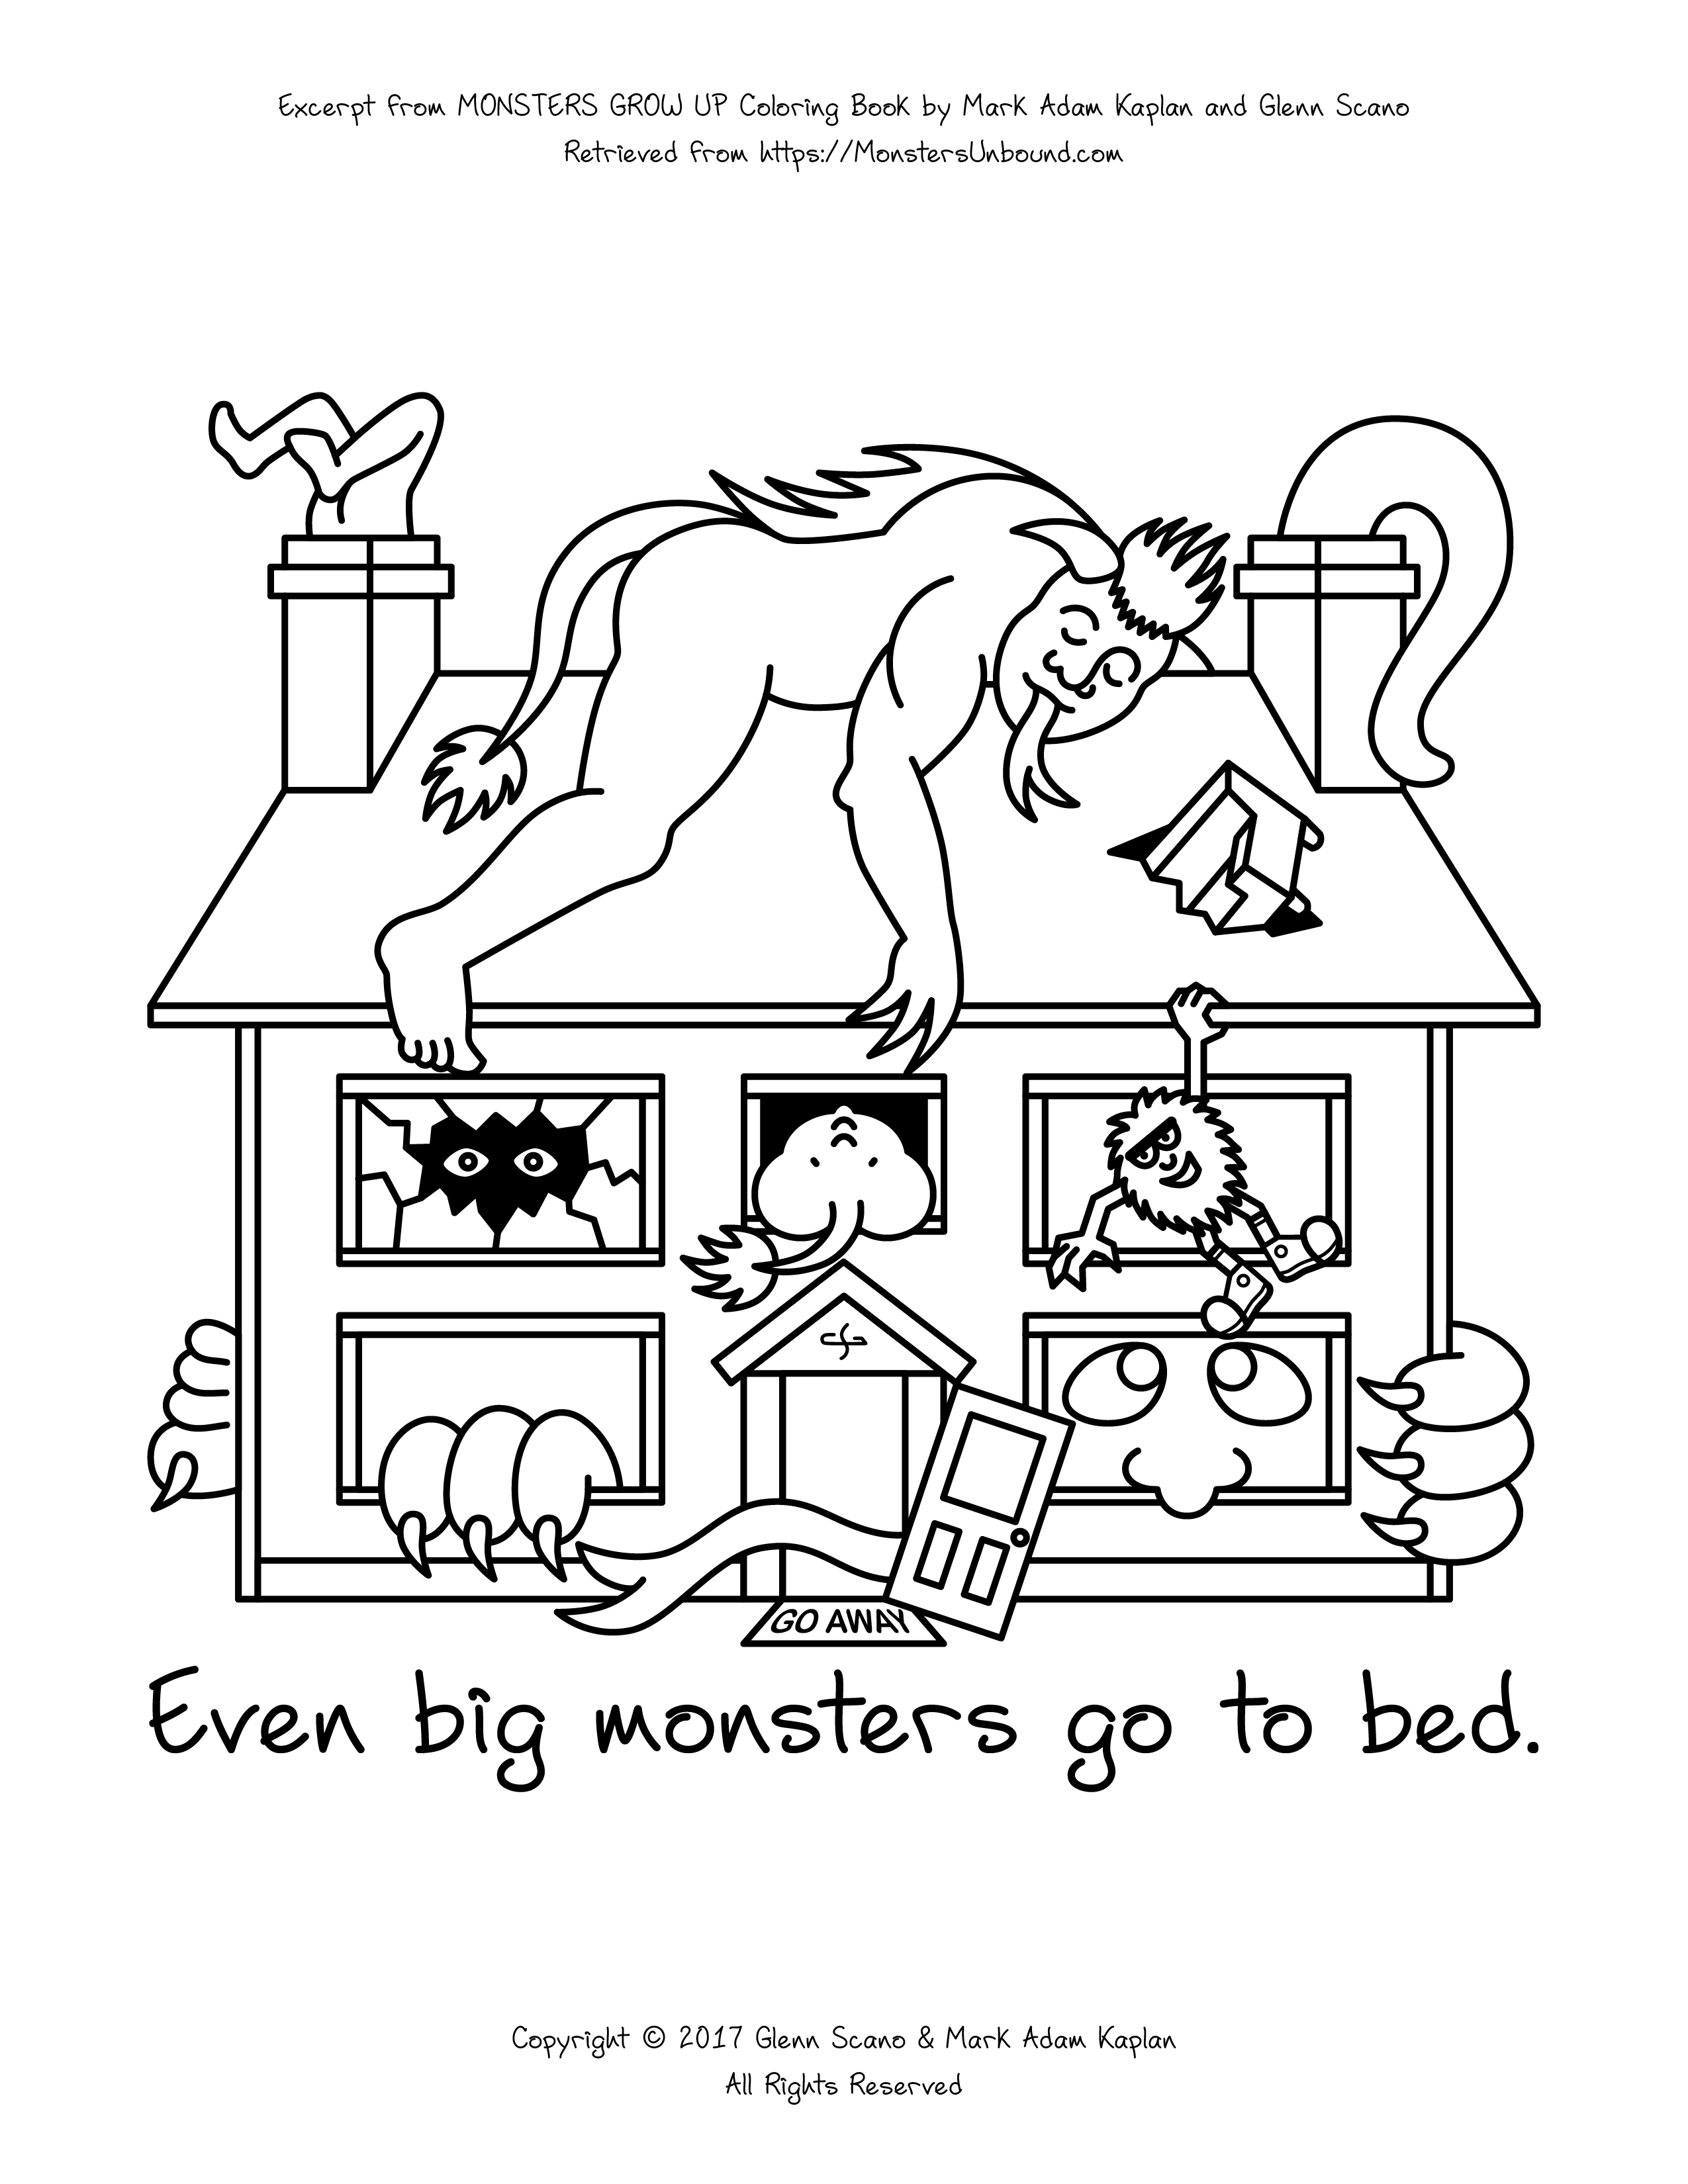 Even big monsters go to bed - coloring page